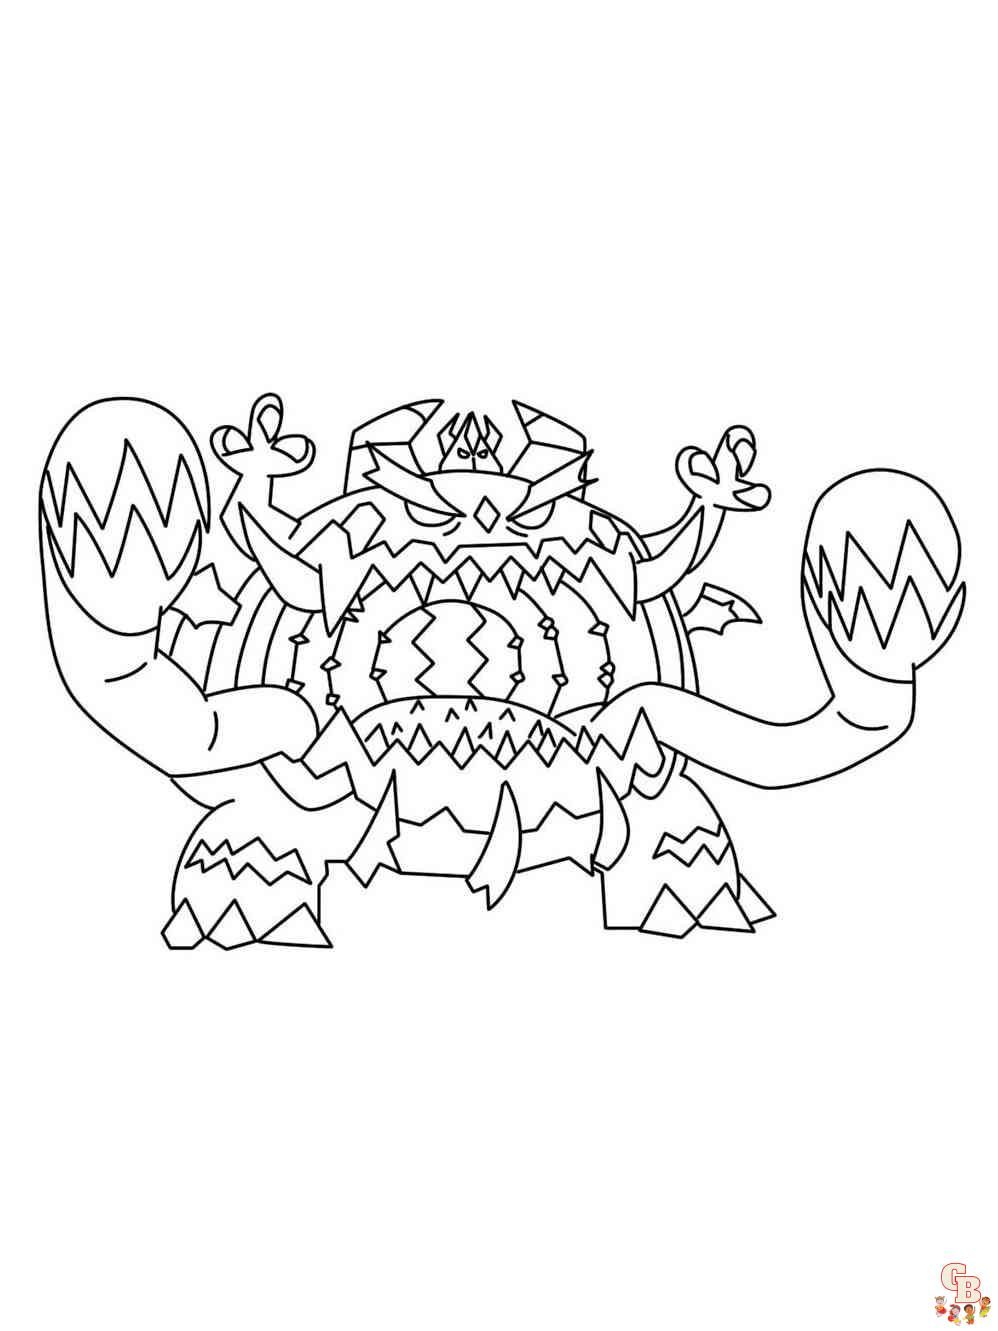 Free Pokemon Guzzlord coloring pages for kids